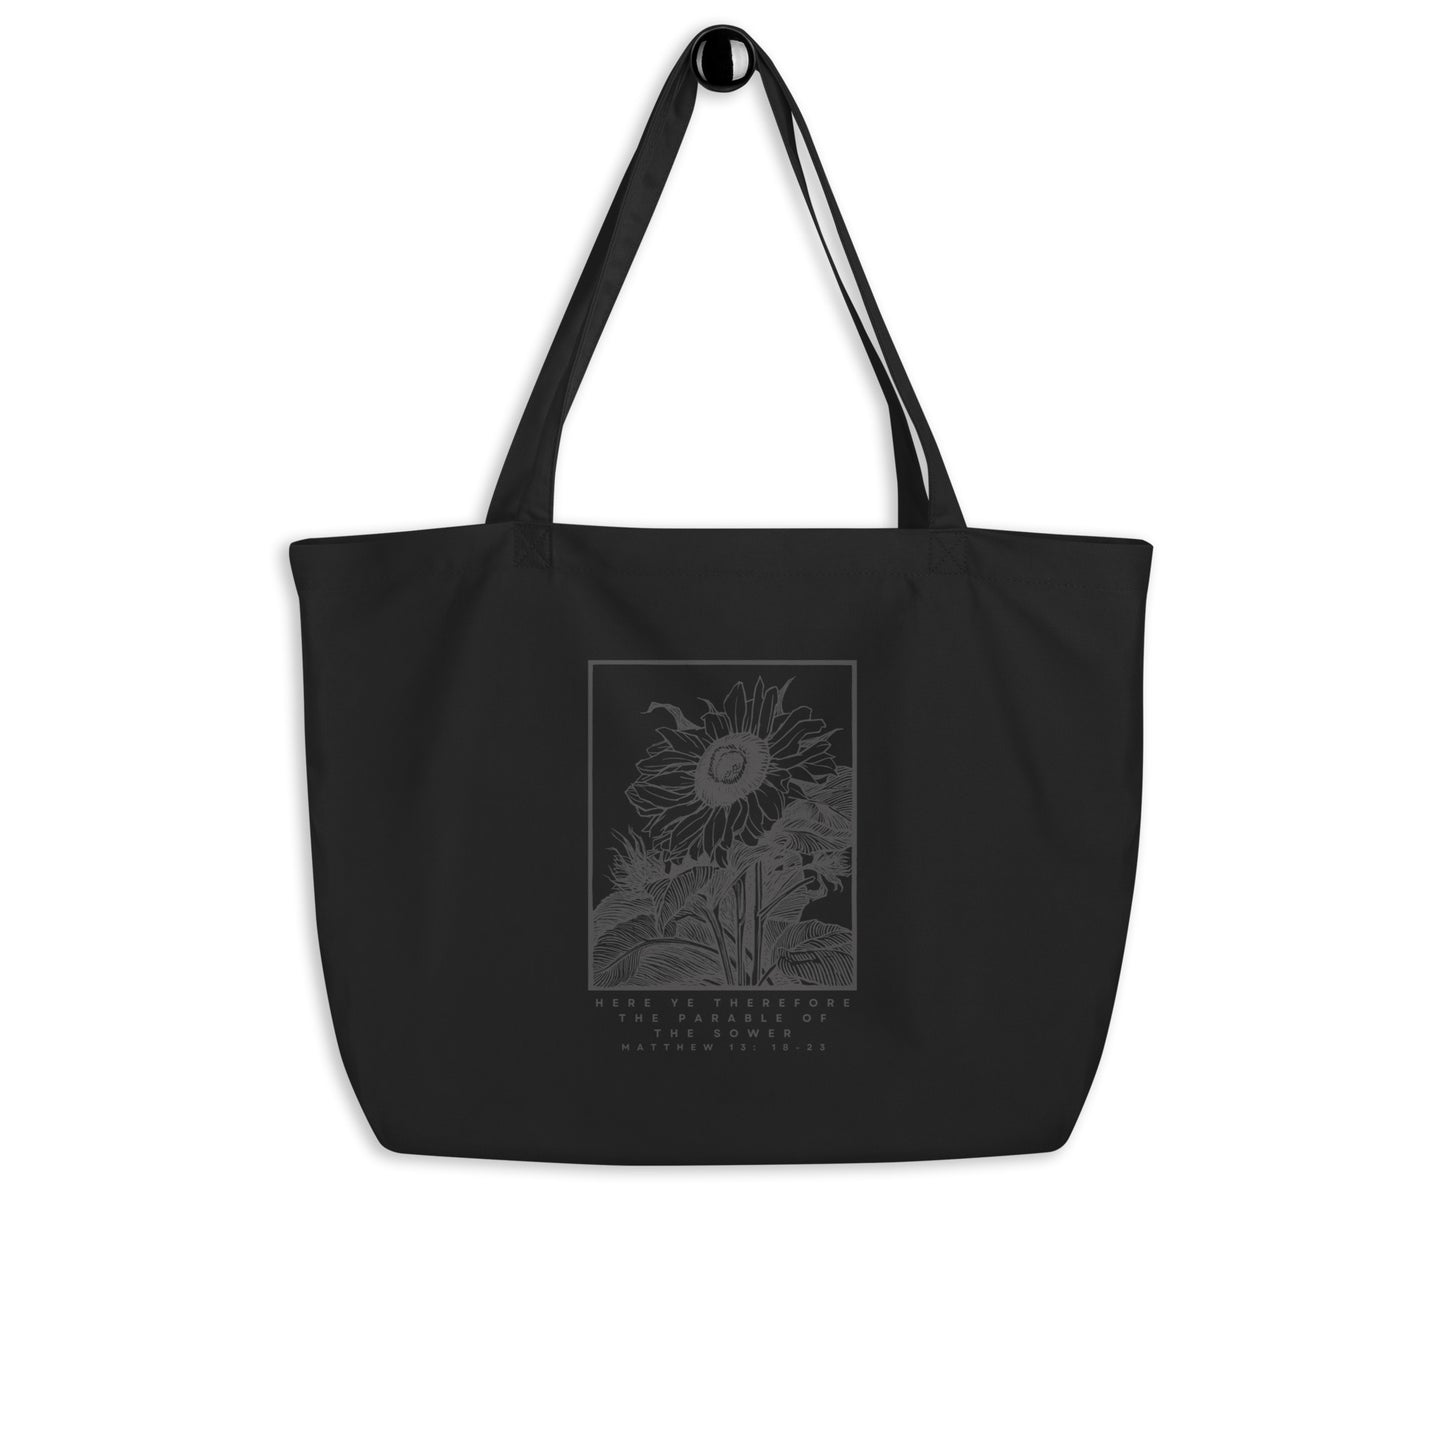 Parable Of The Sower organic tote bag